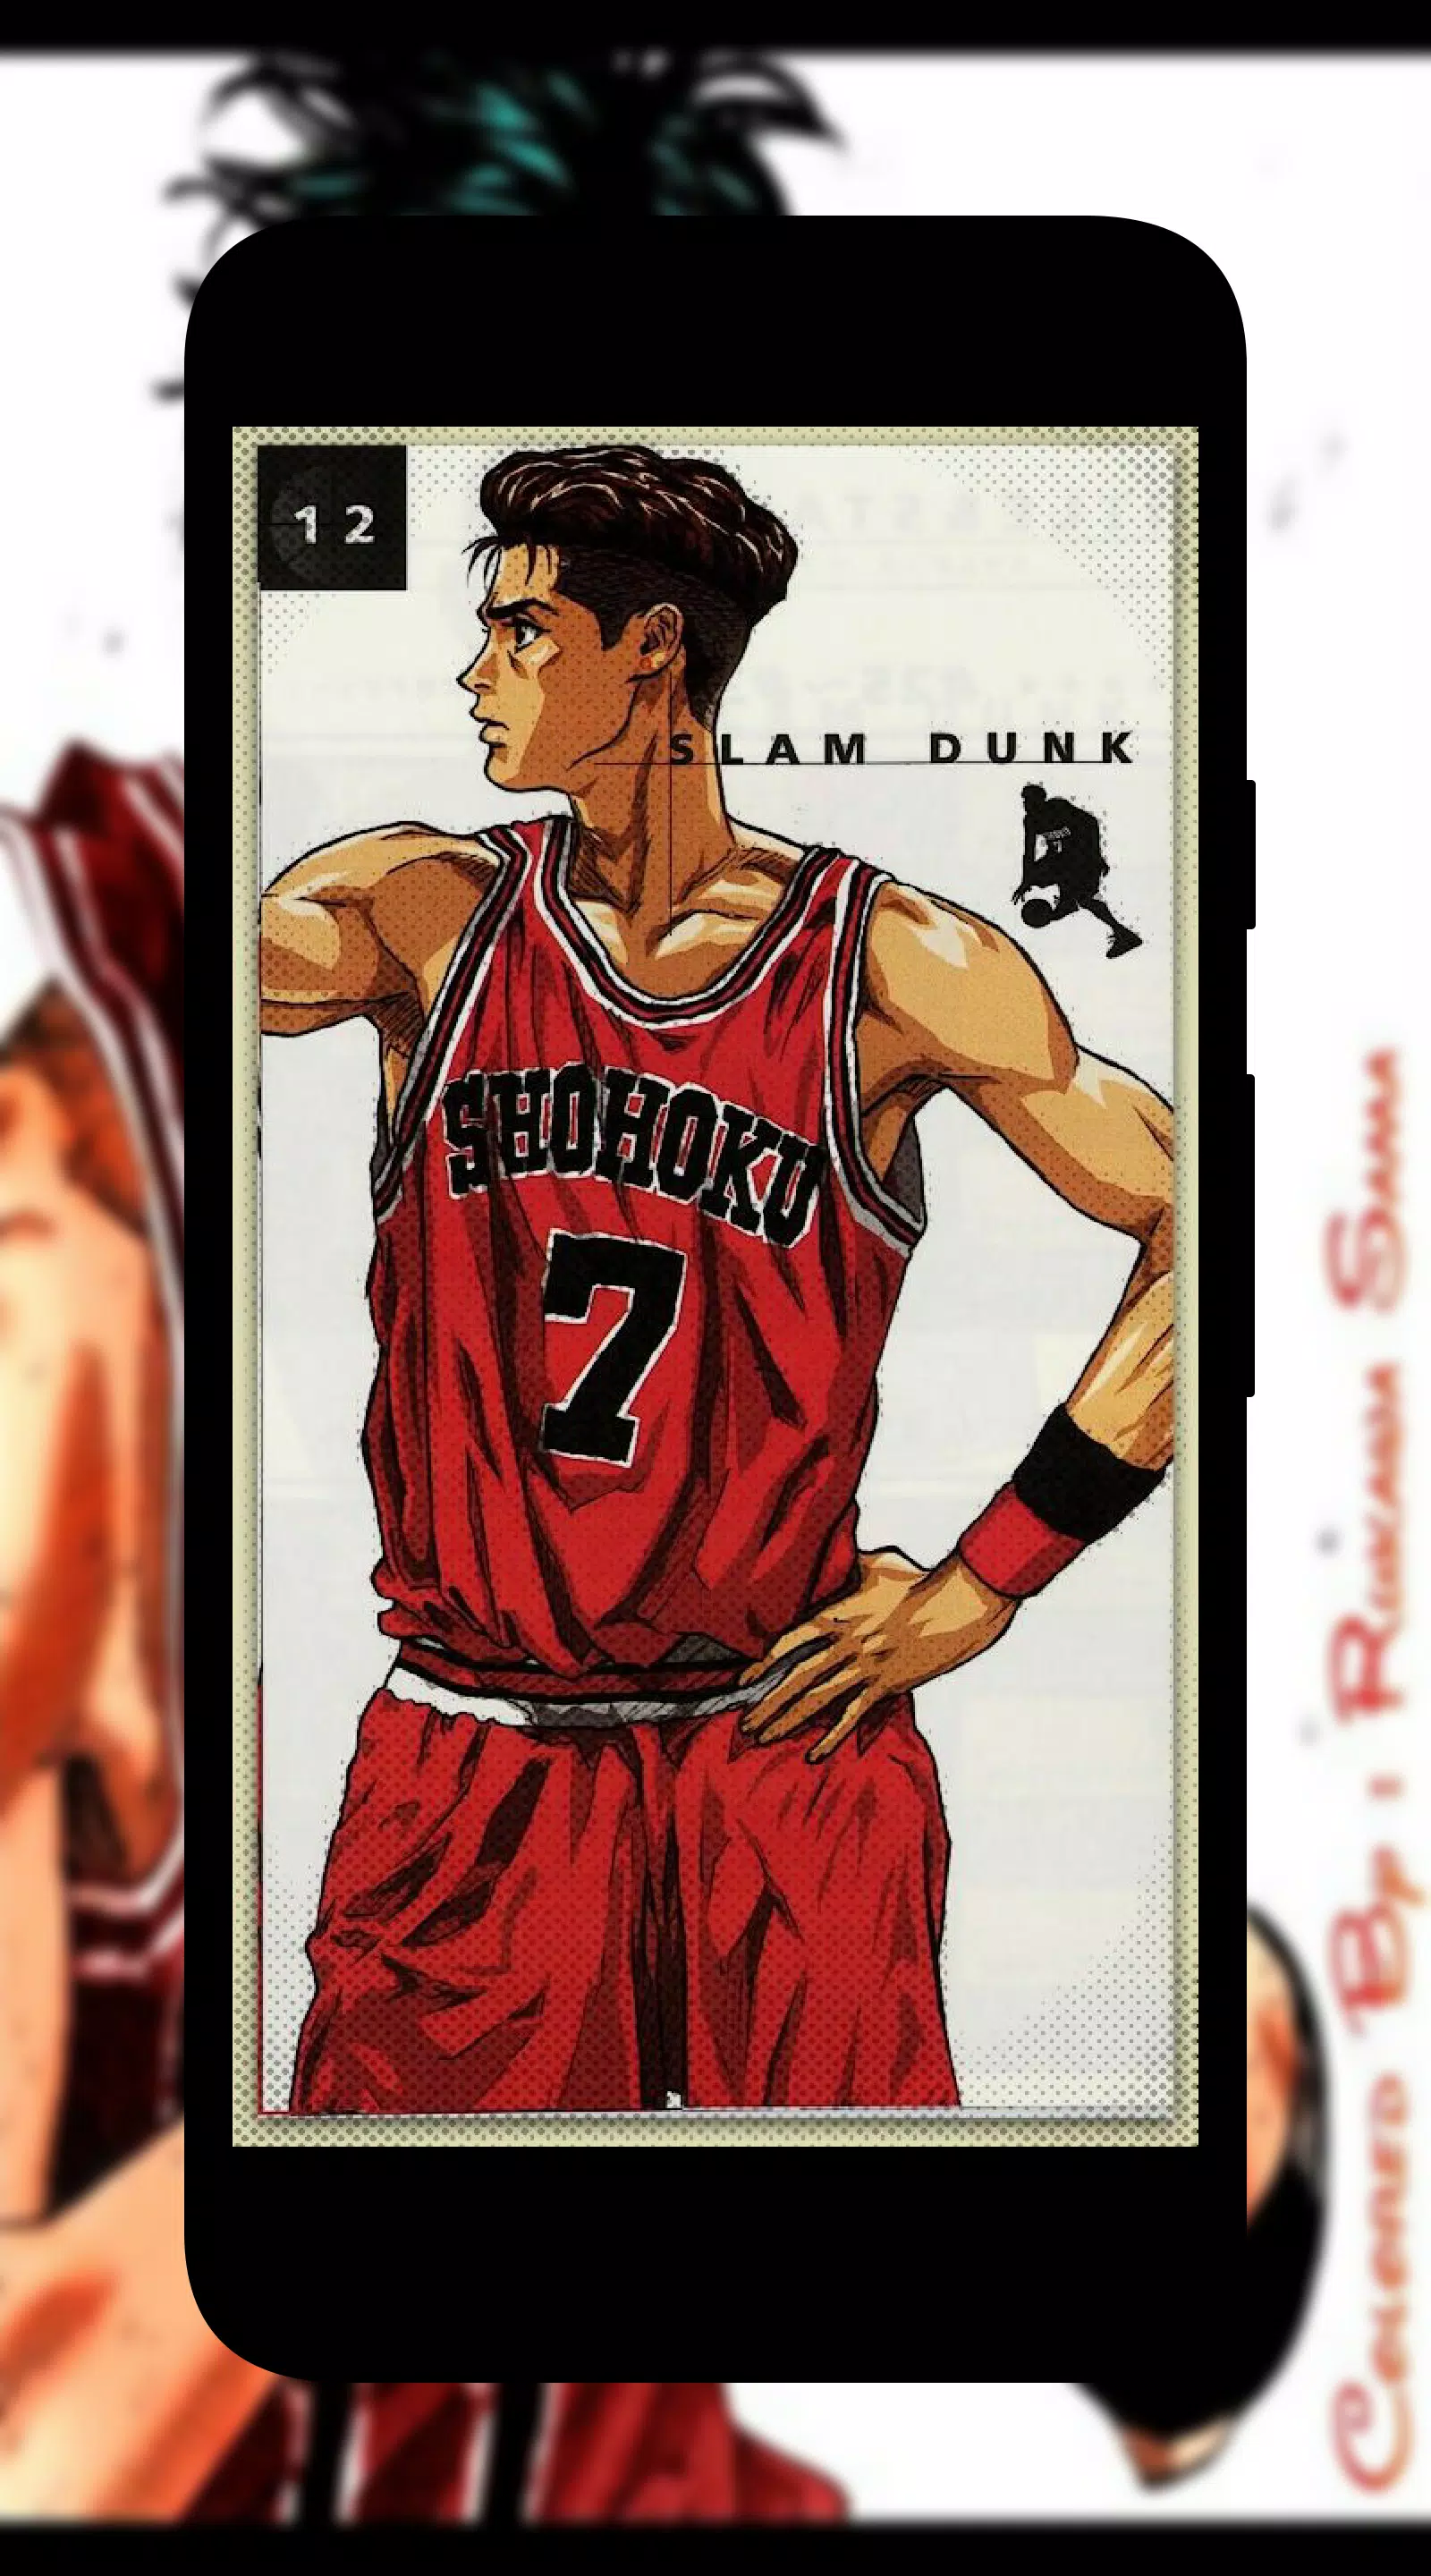 Slamdunk Wallpaper Hd Apk For Android Download